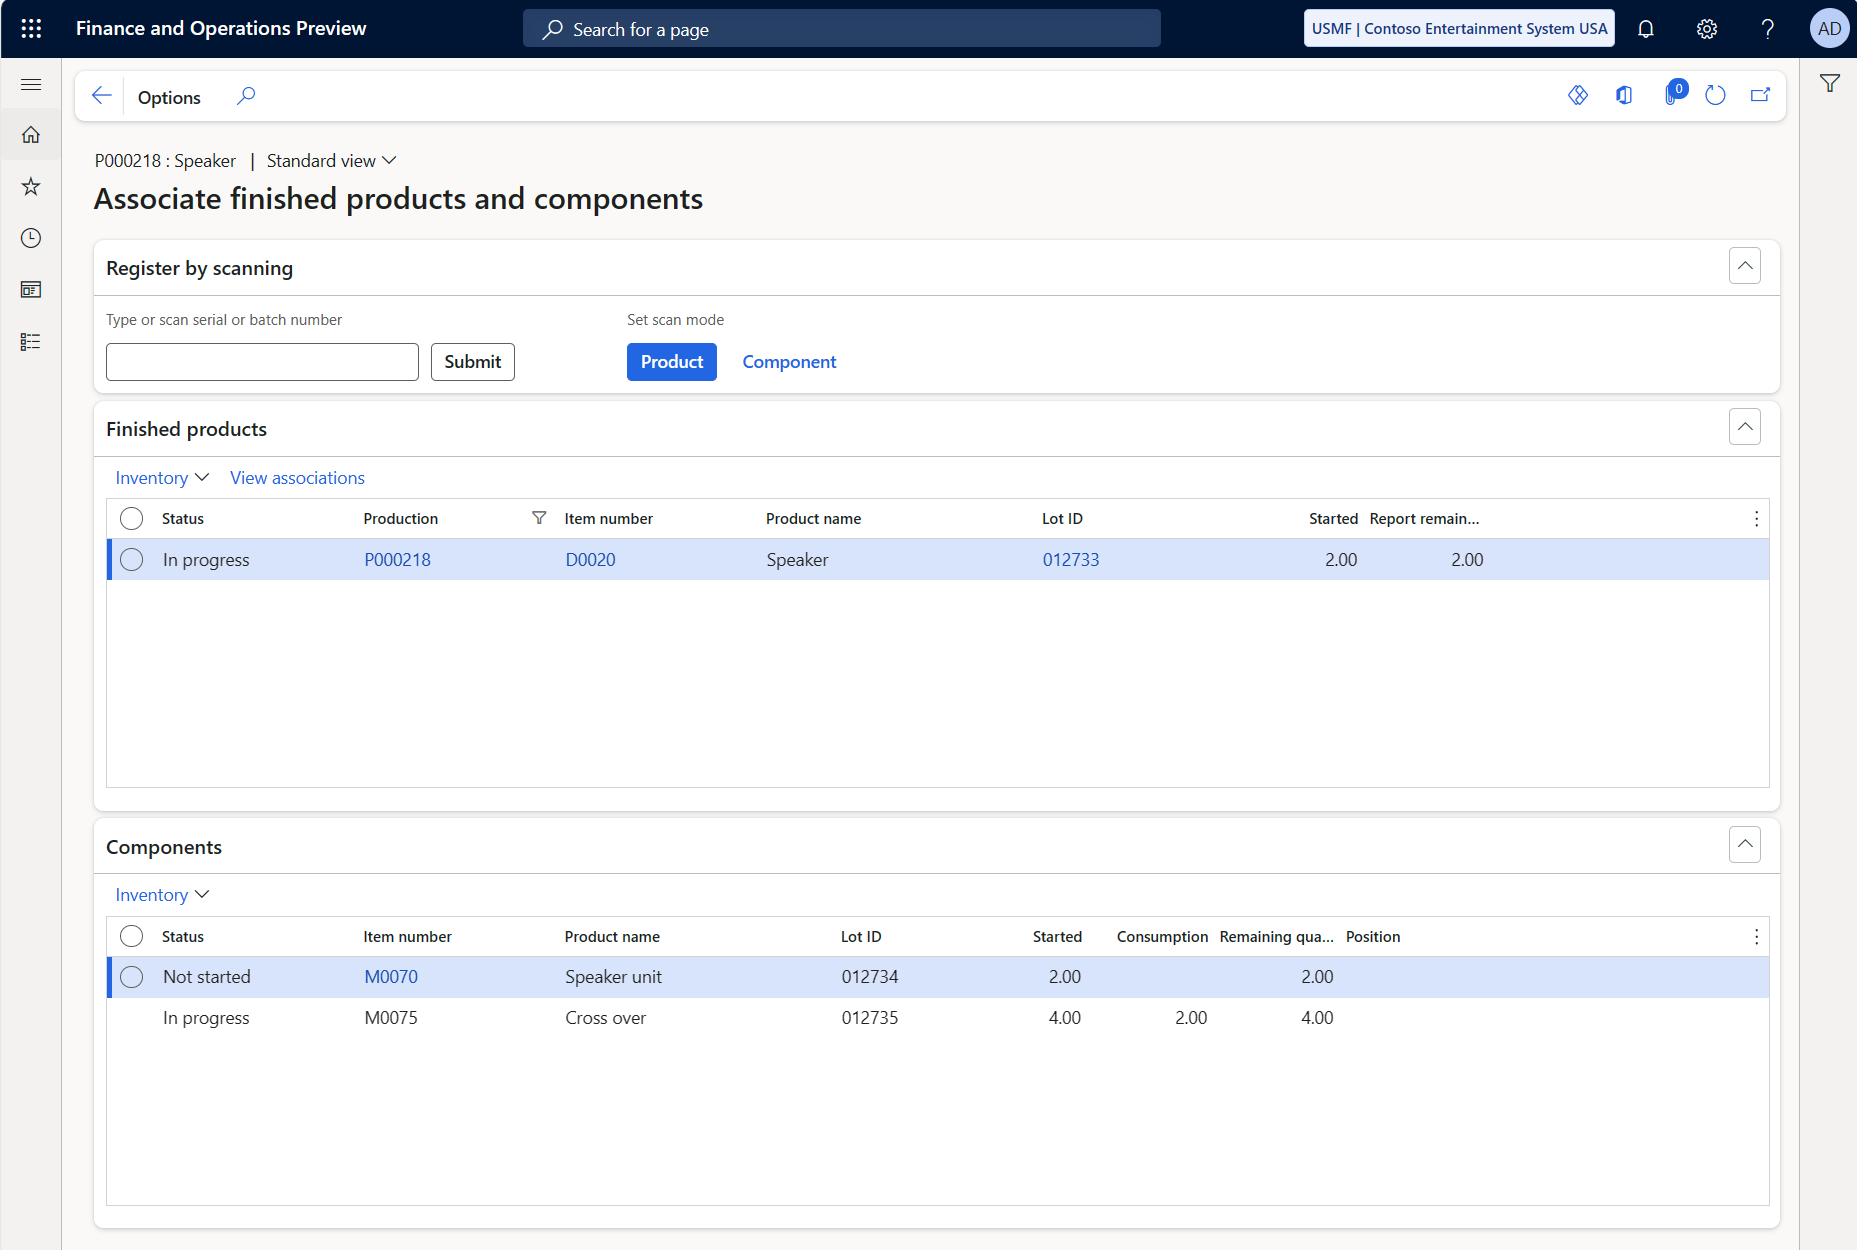 Screenshot of the Tracked components page.